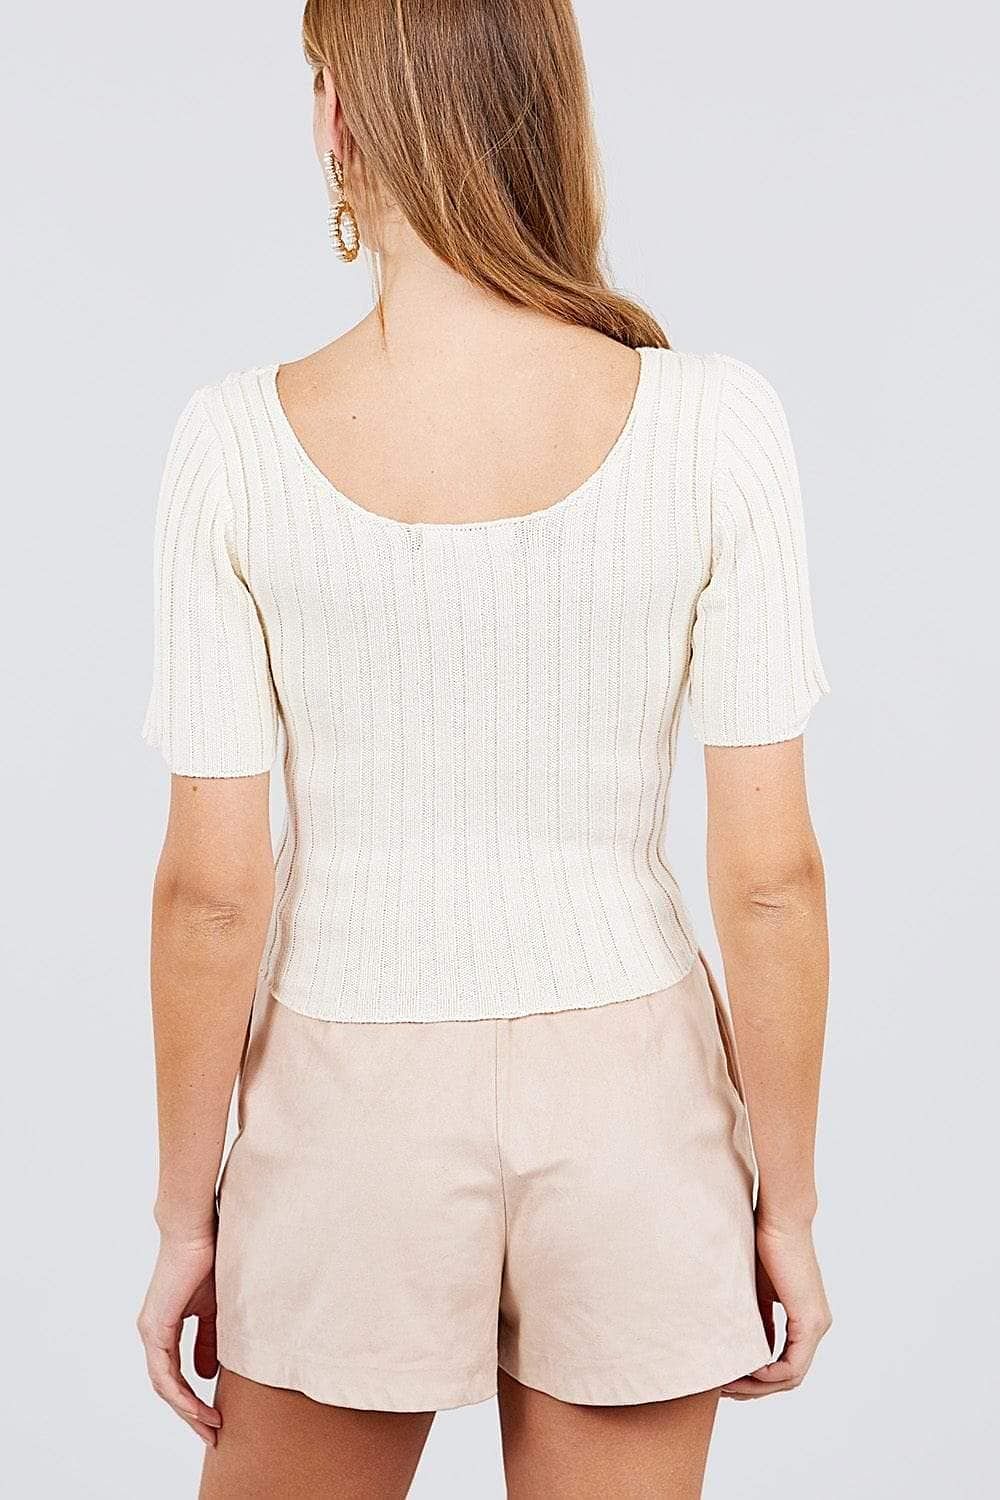 Off White Short Sleeve Rib Knitted Sweater - Shopping Therapy, LLC Tops